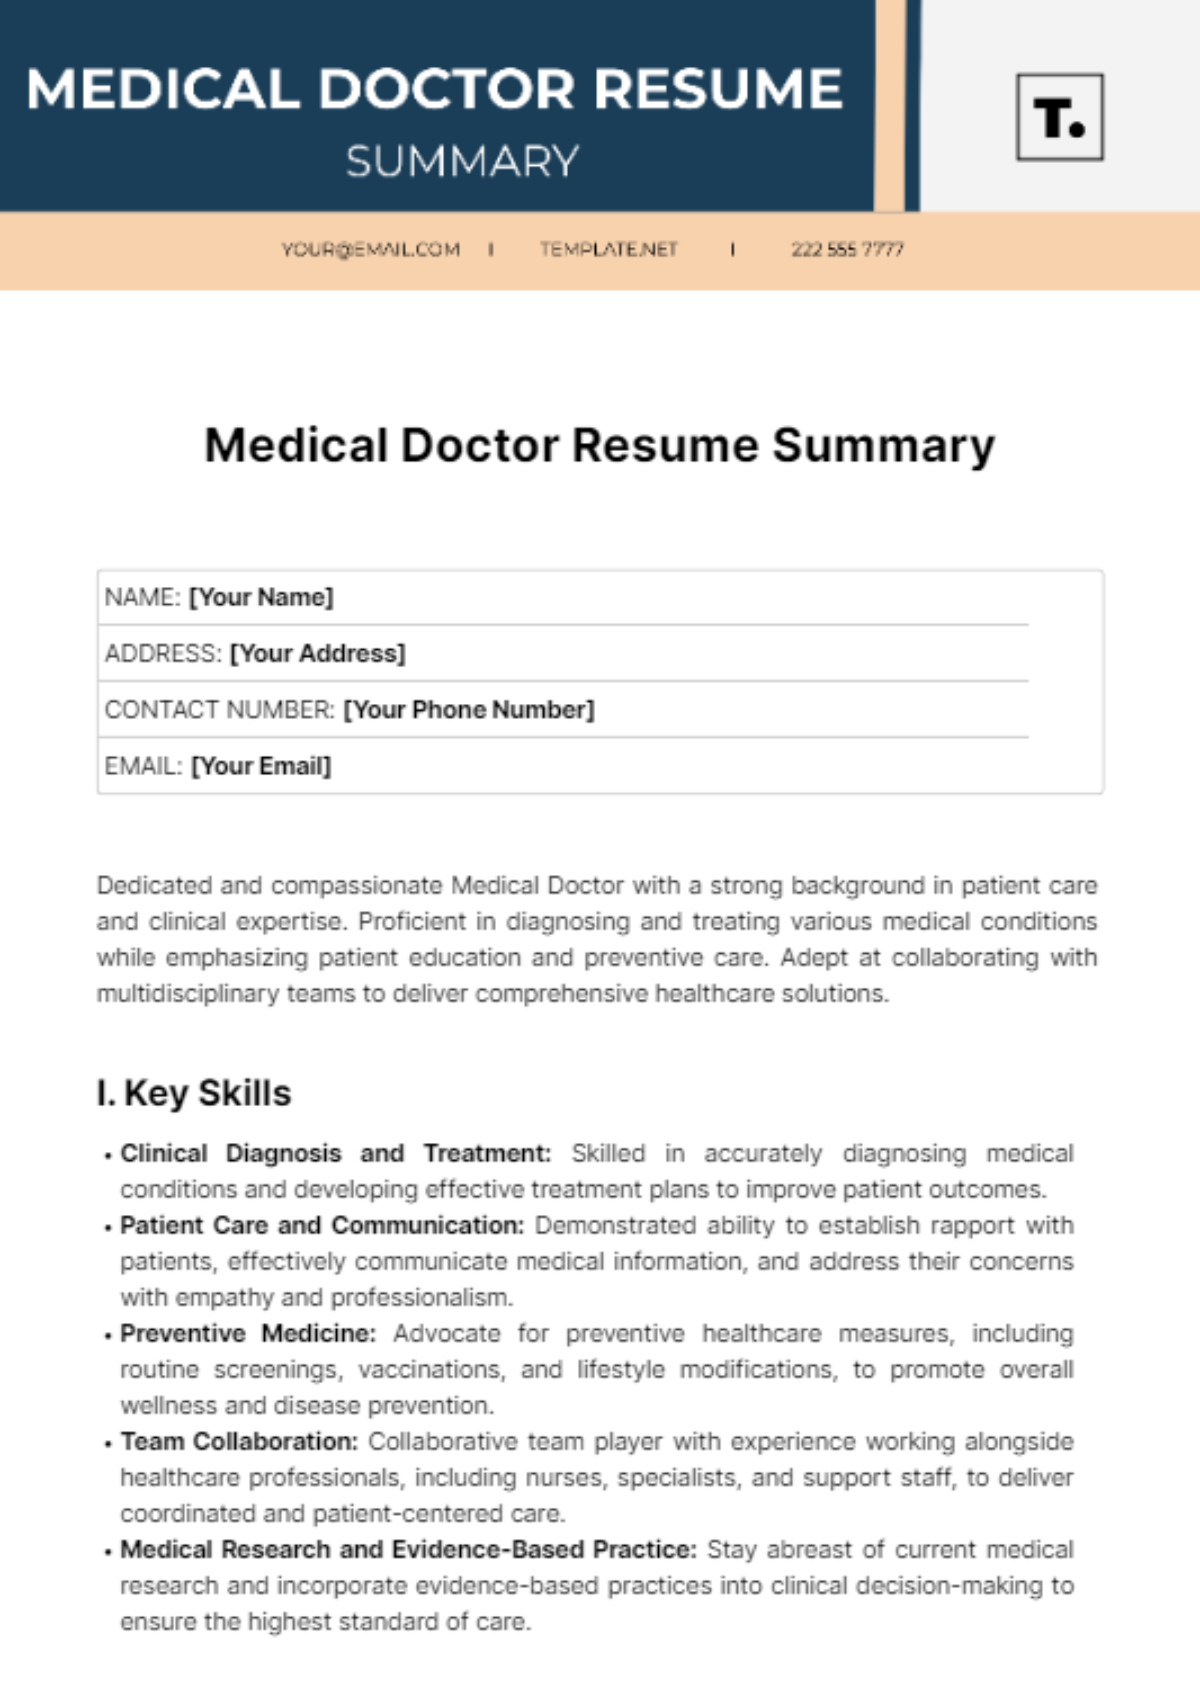 Medical Doctor Resume Summary Template